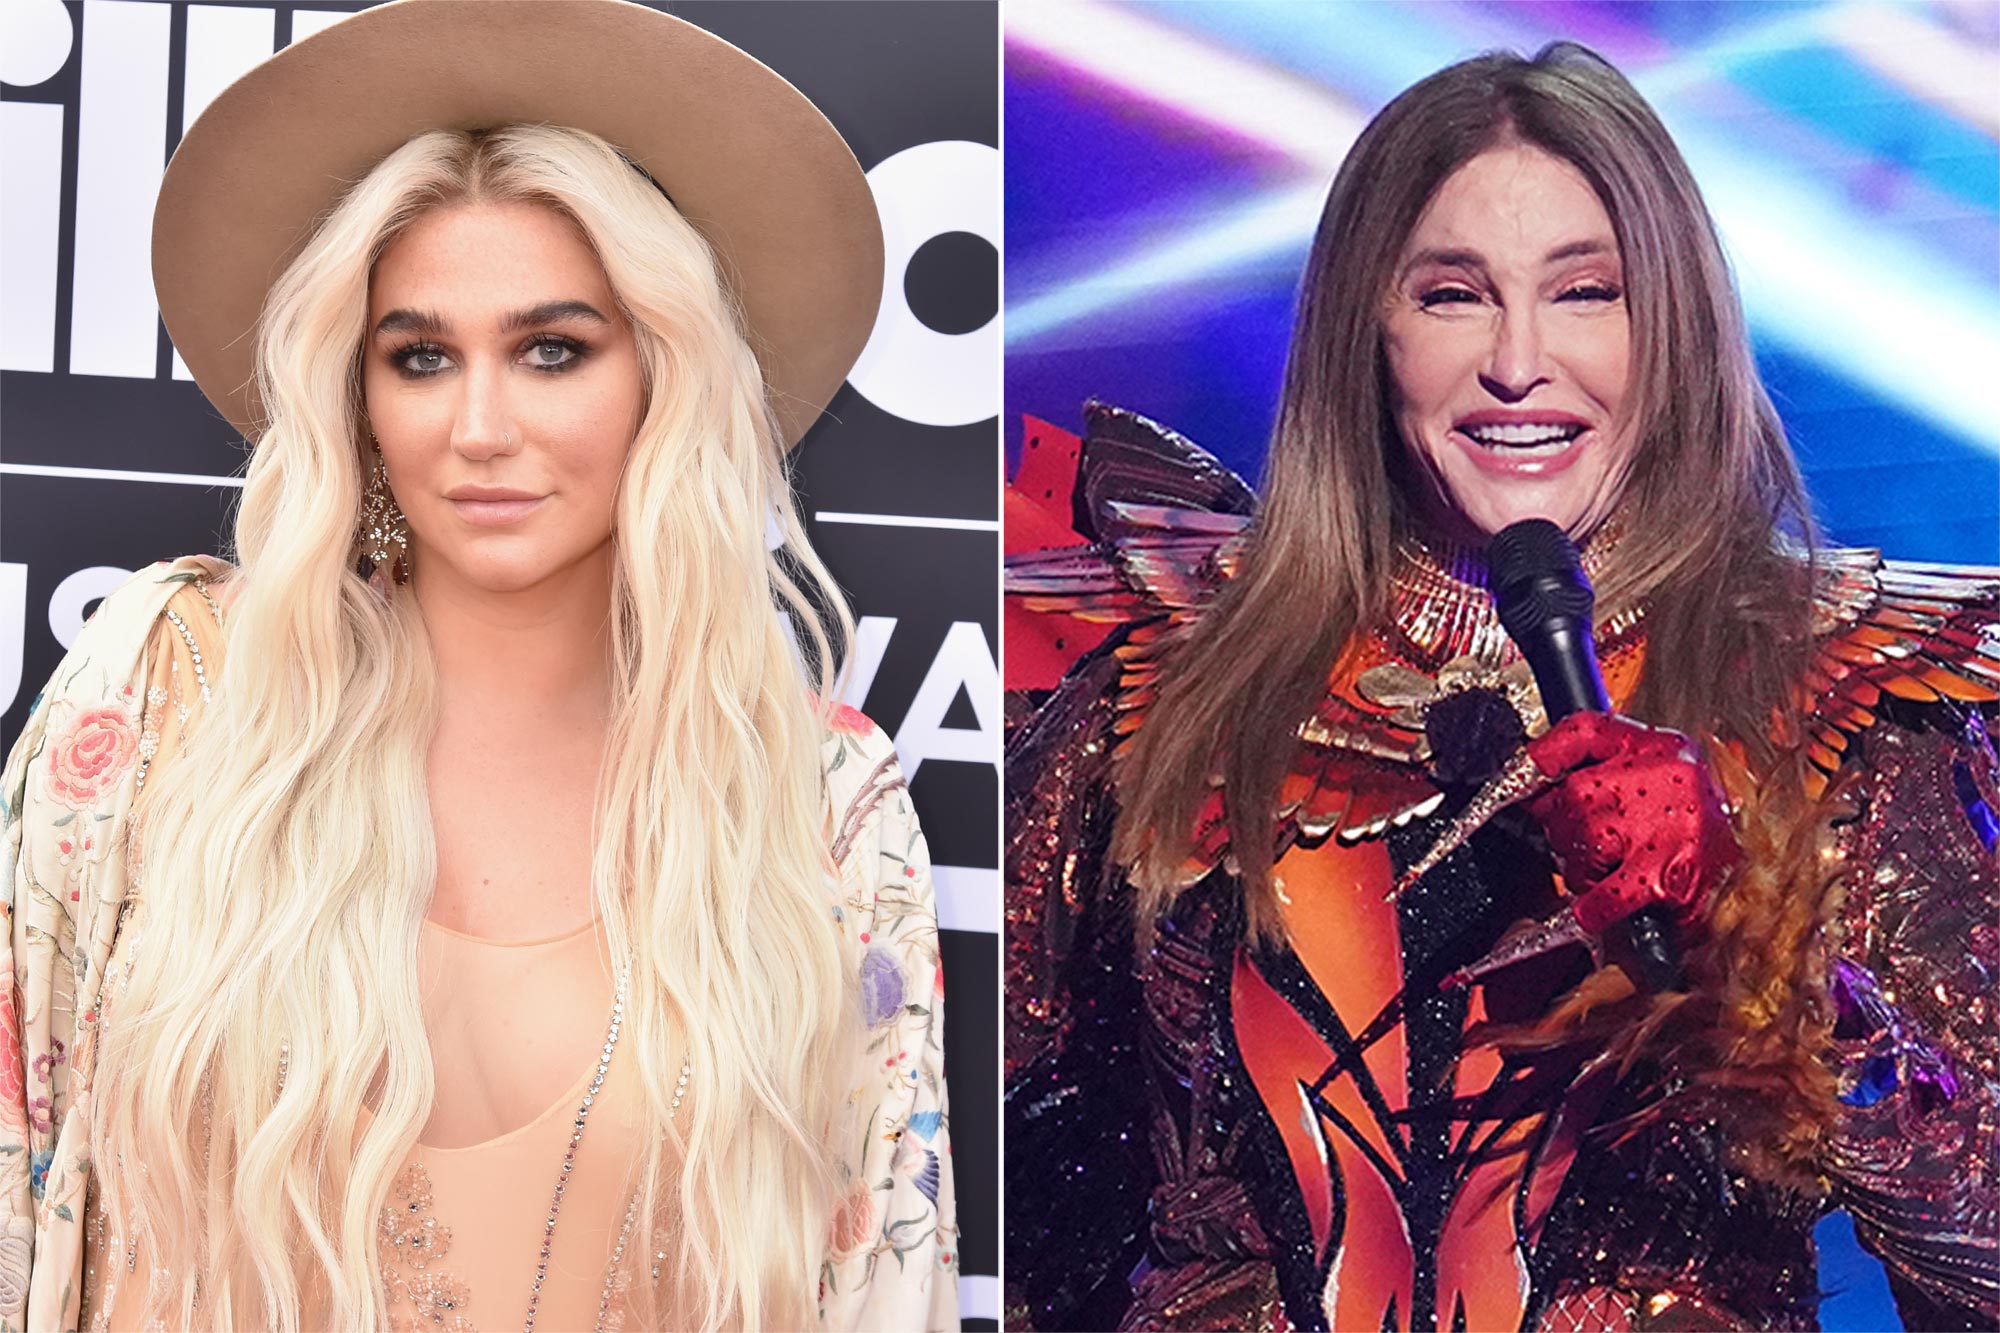 Sadly, Kesha has now seen Caitlyn Jenner’s rendition of ‘Tik Tok’ on The Masked Singer